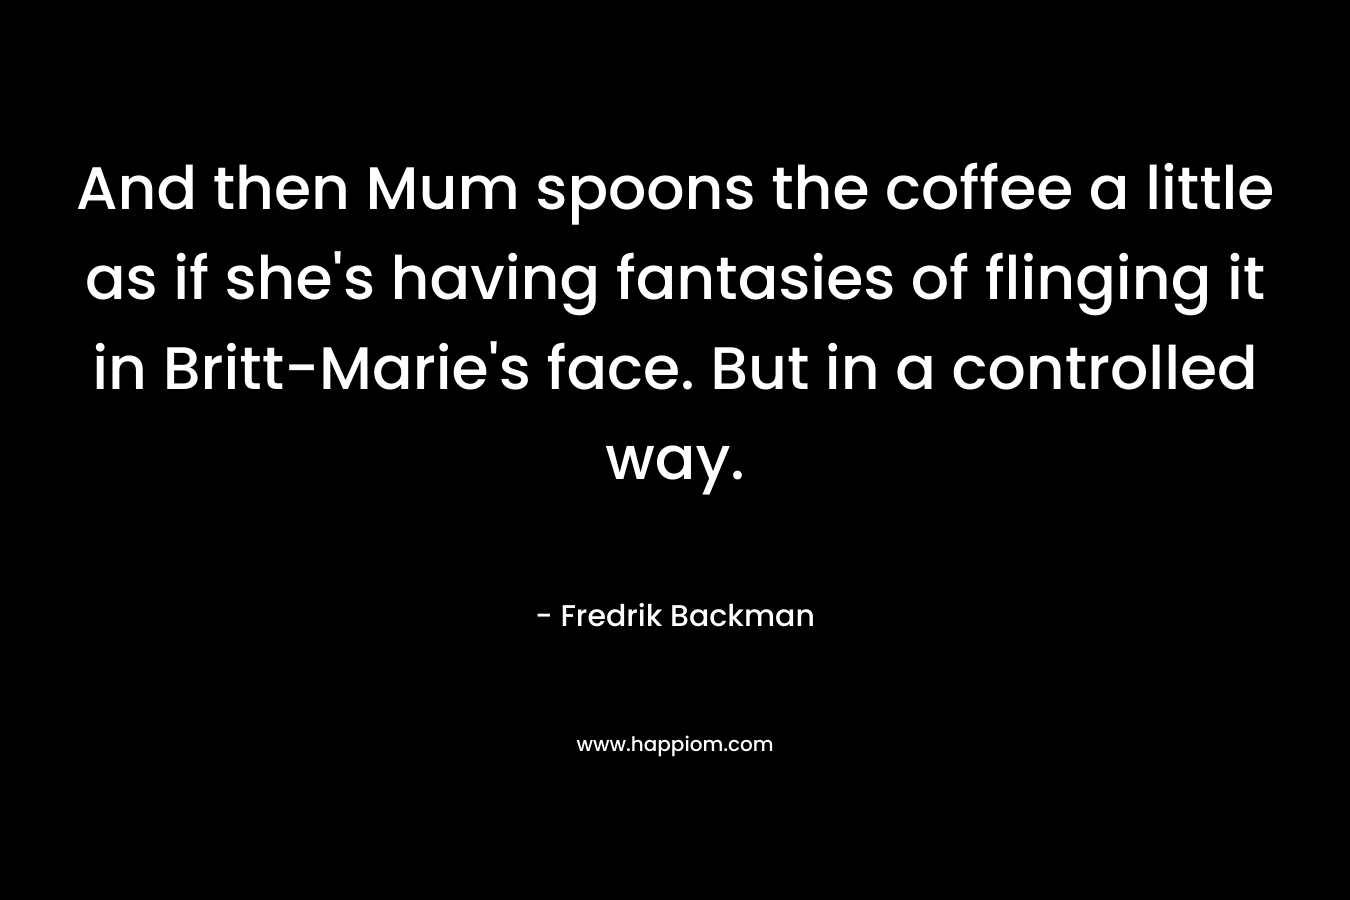 And then Mum spoons the coffee a little as if she’s having fantasies of flinging it in Britt-Marie’s face. But in a controlled way. – Fredrik Backman